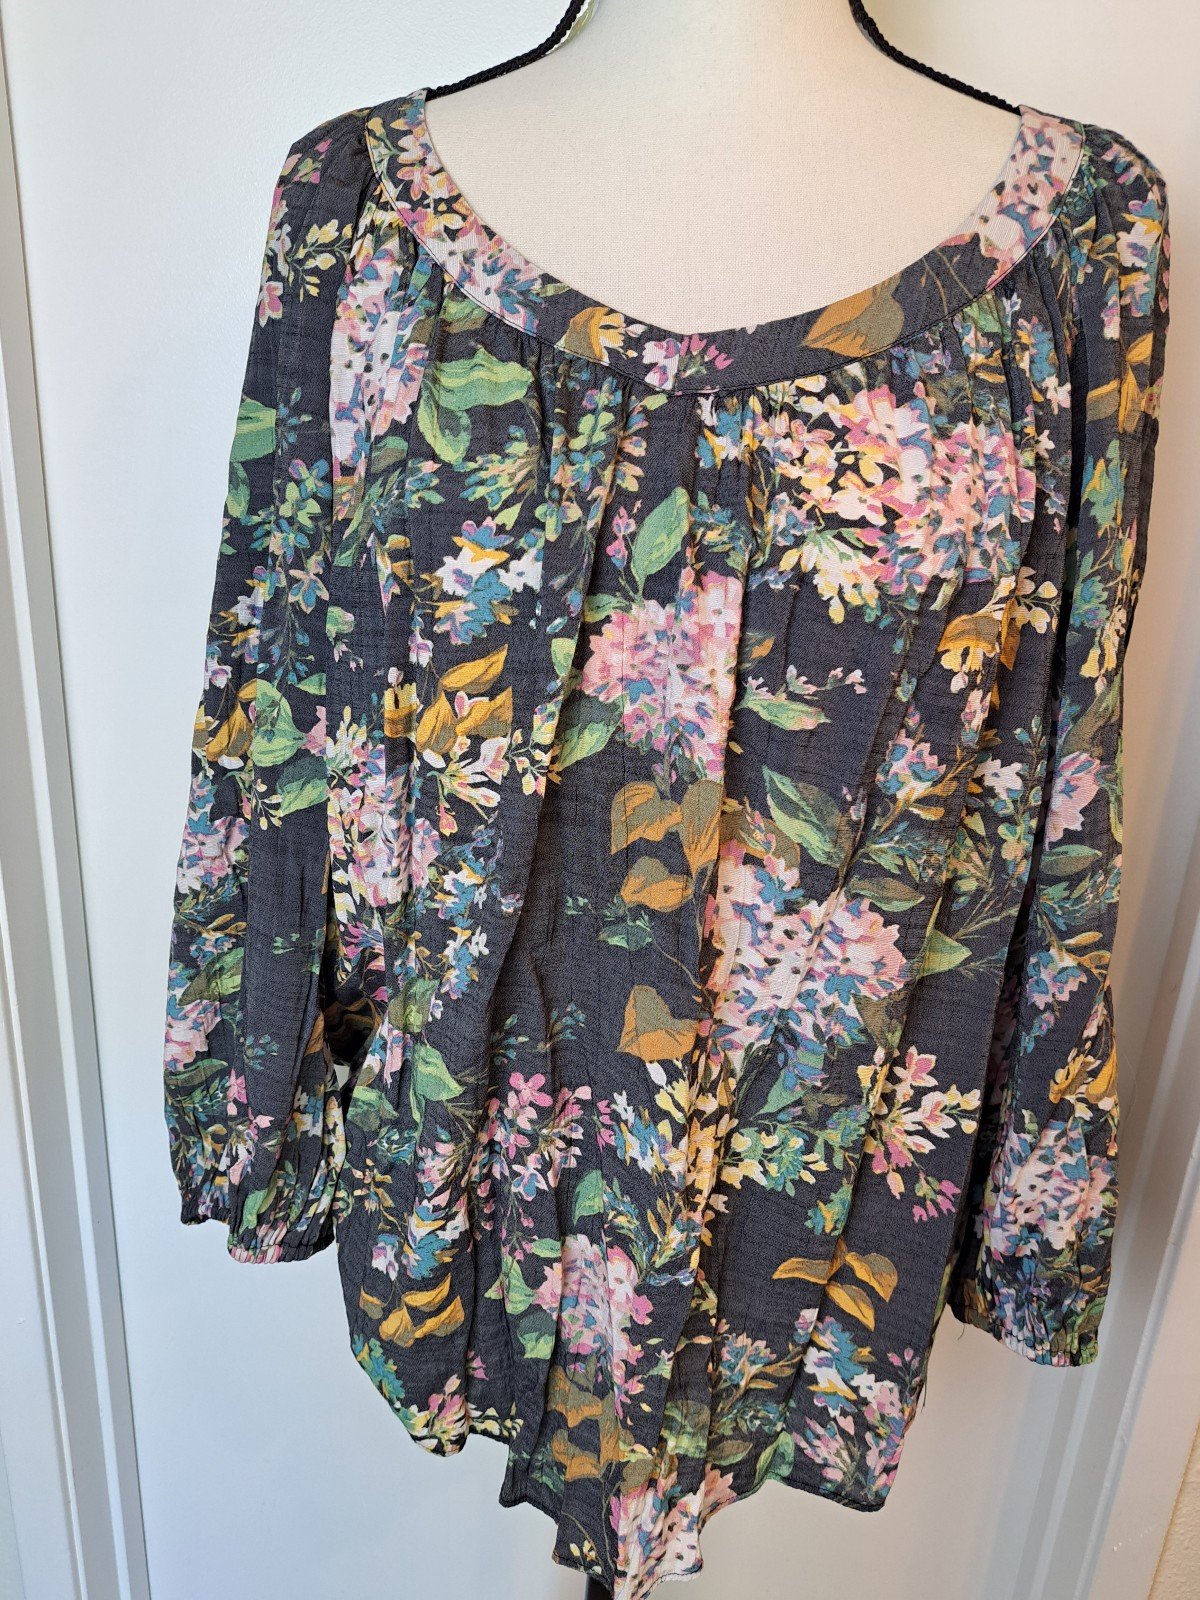 Stylish Lauren conrad XL ditzy floral charcoal gray peasant baloon sleeve blouse oF8MevW5H Buying Cheap